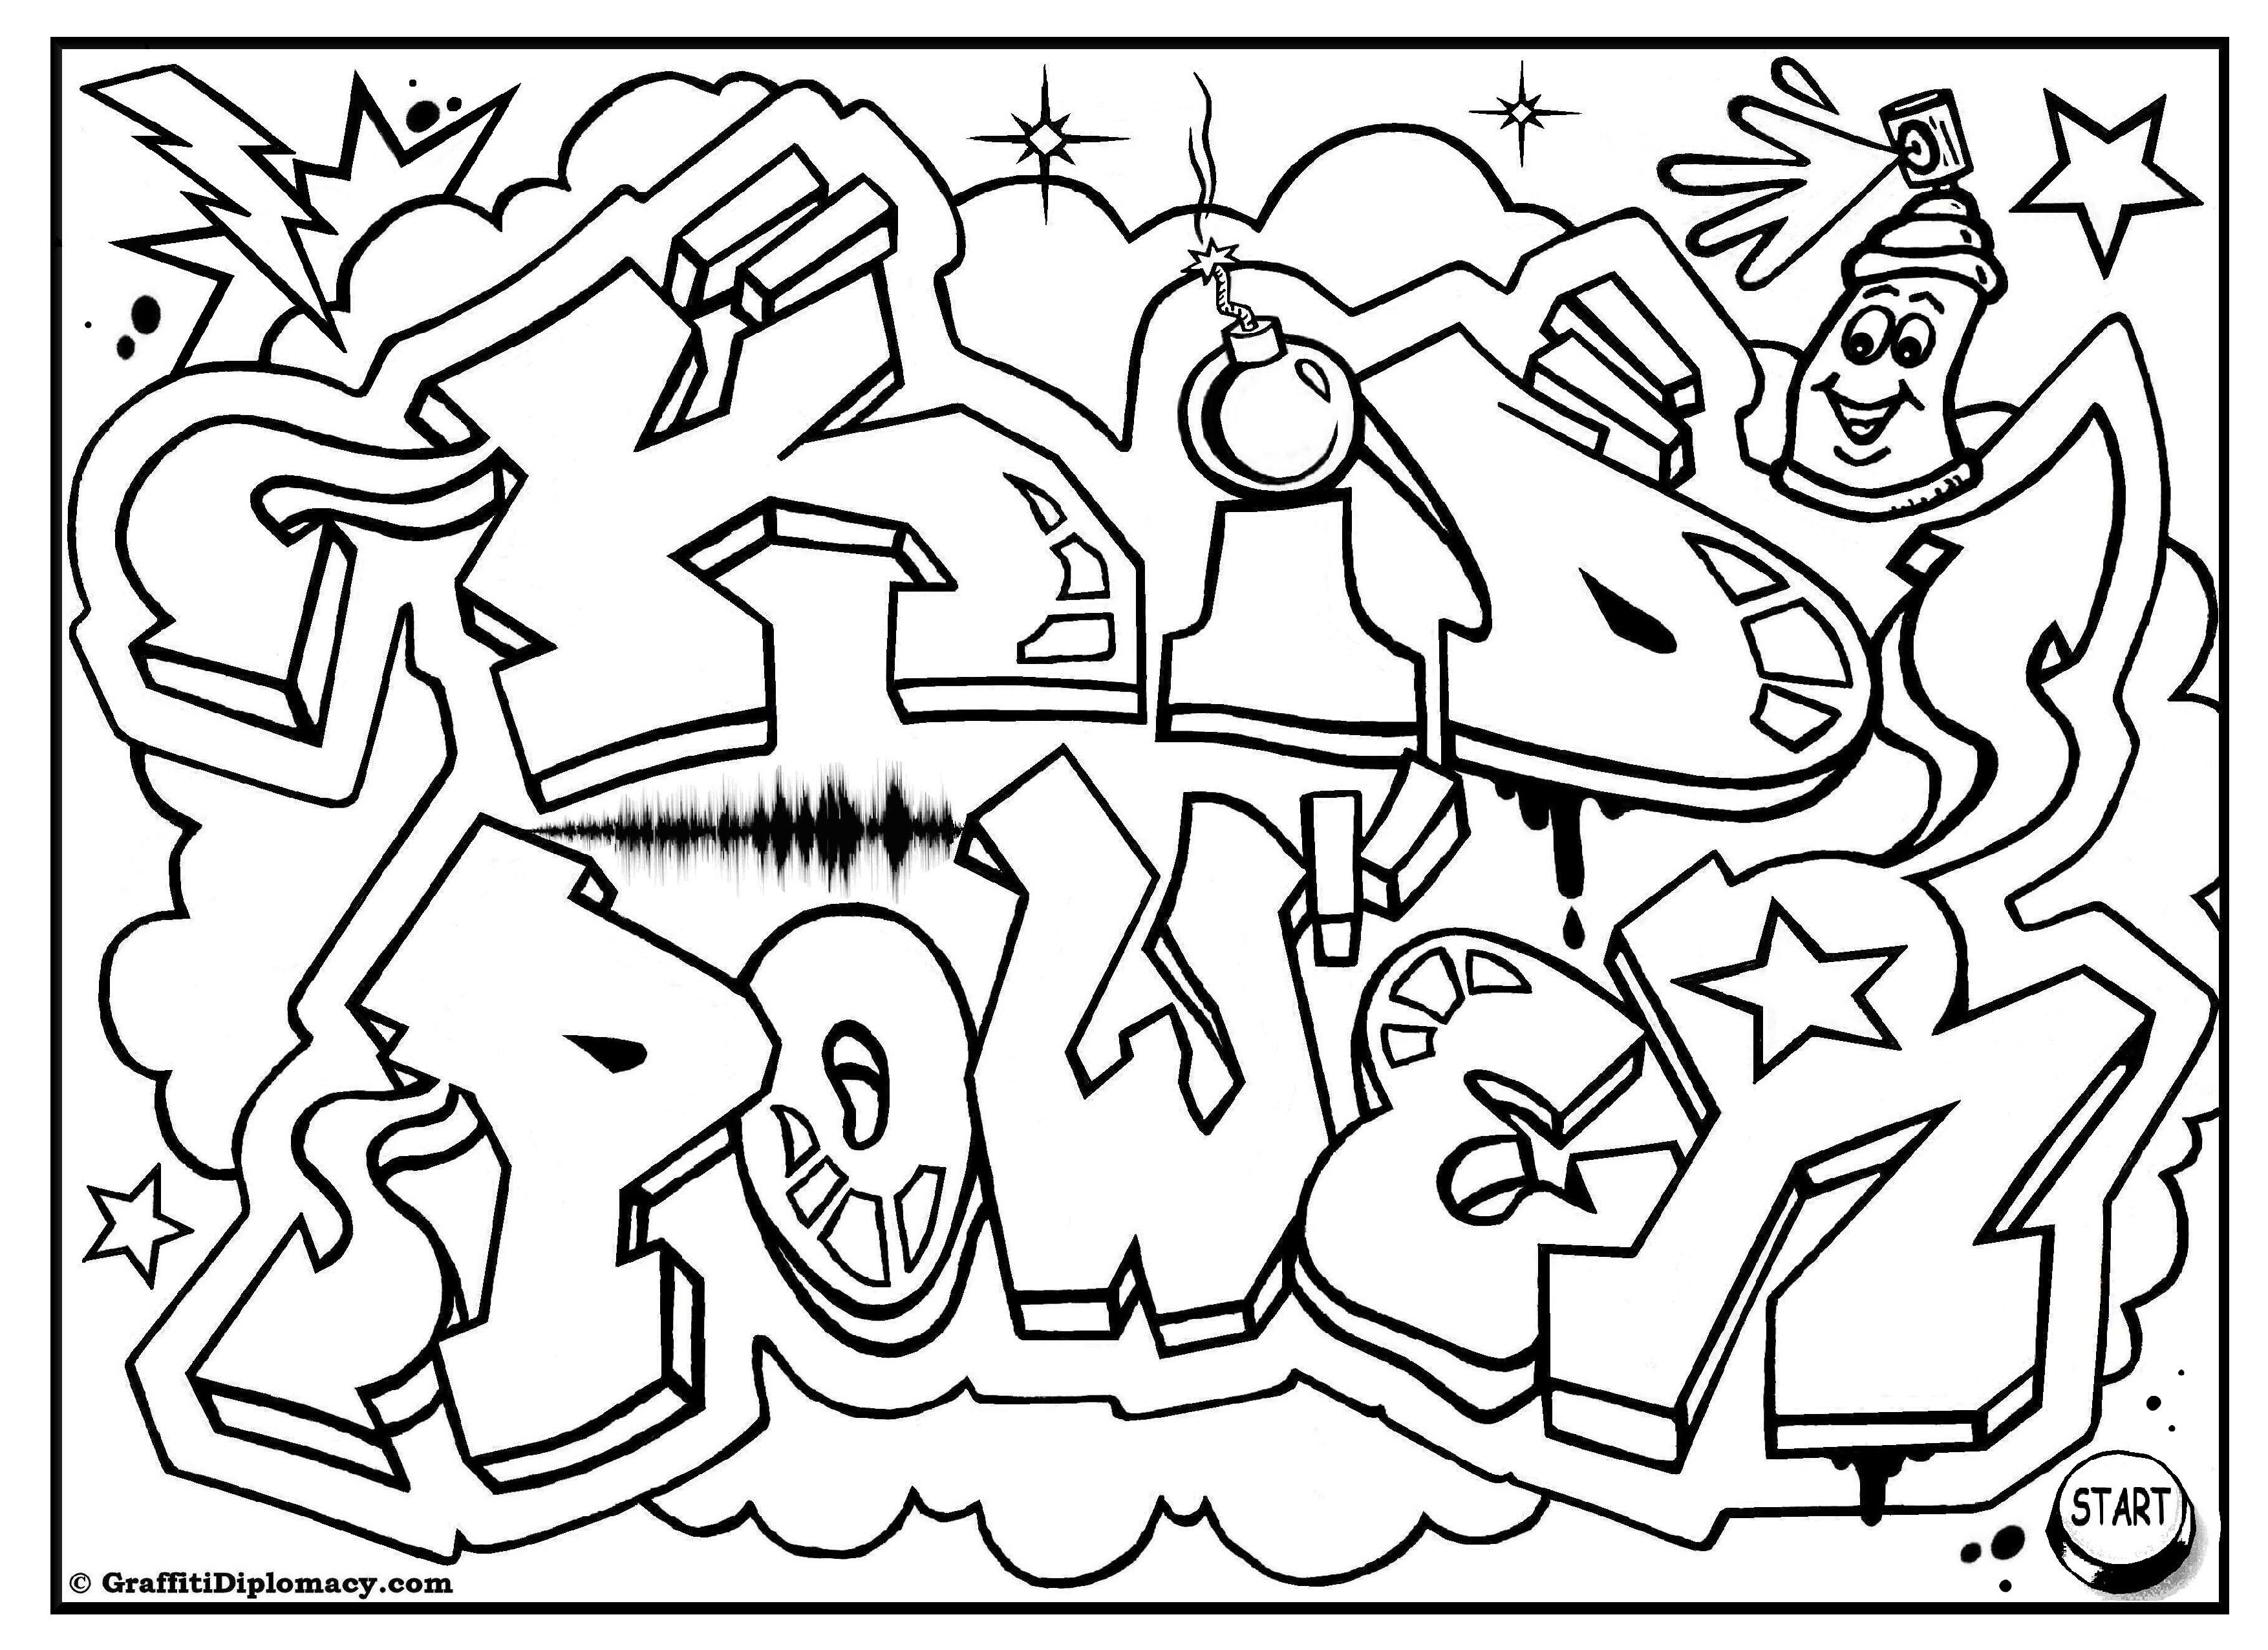 Cool Graffiti Coloring Pages - Coloring Home